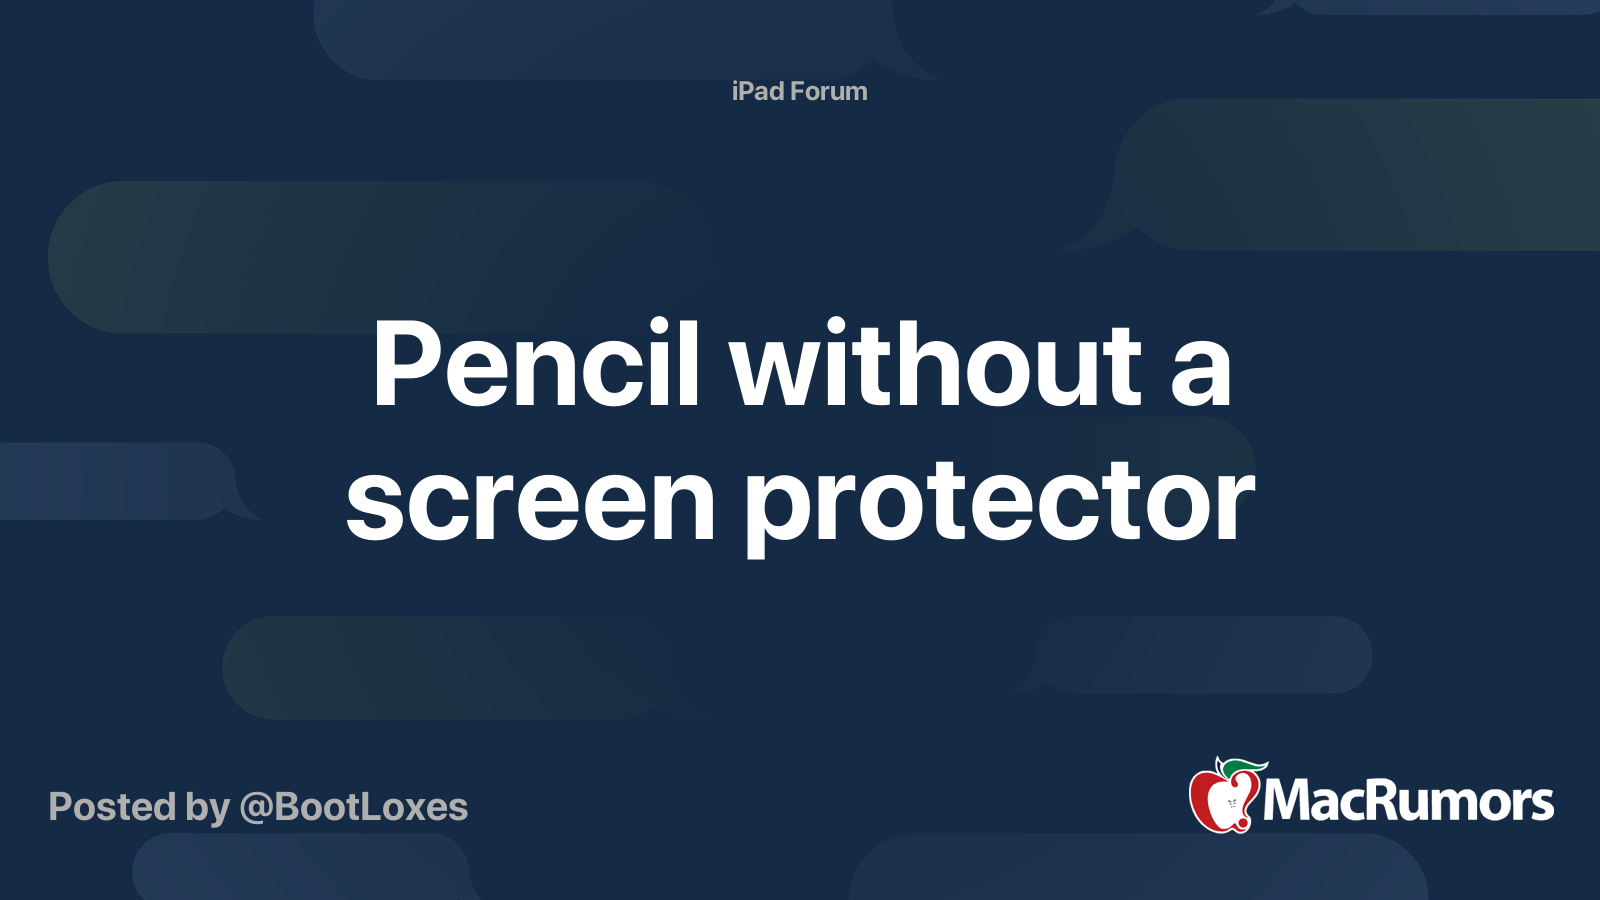 Is it bad to use Apple Pencil without screen protector?